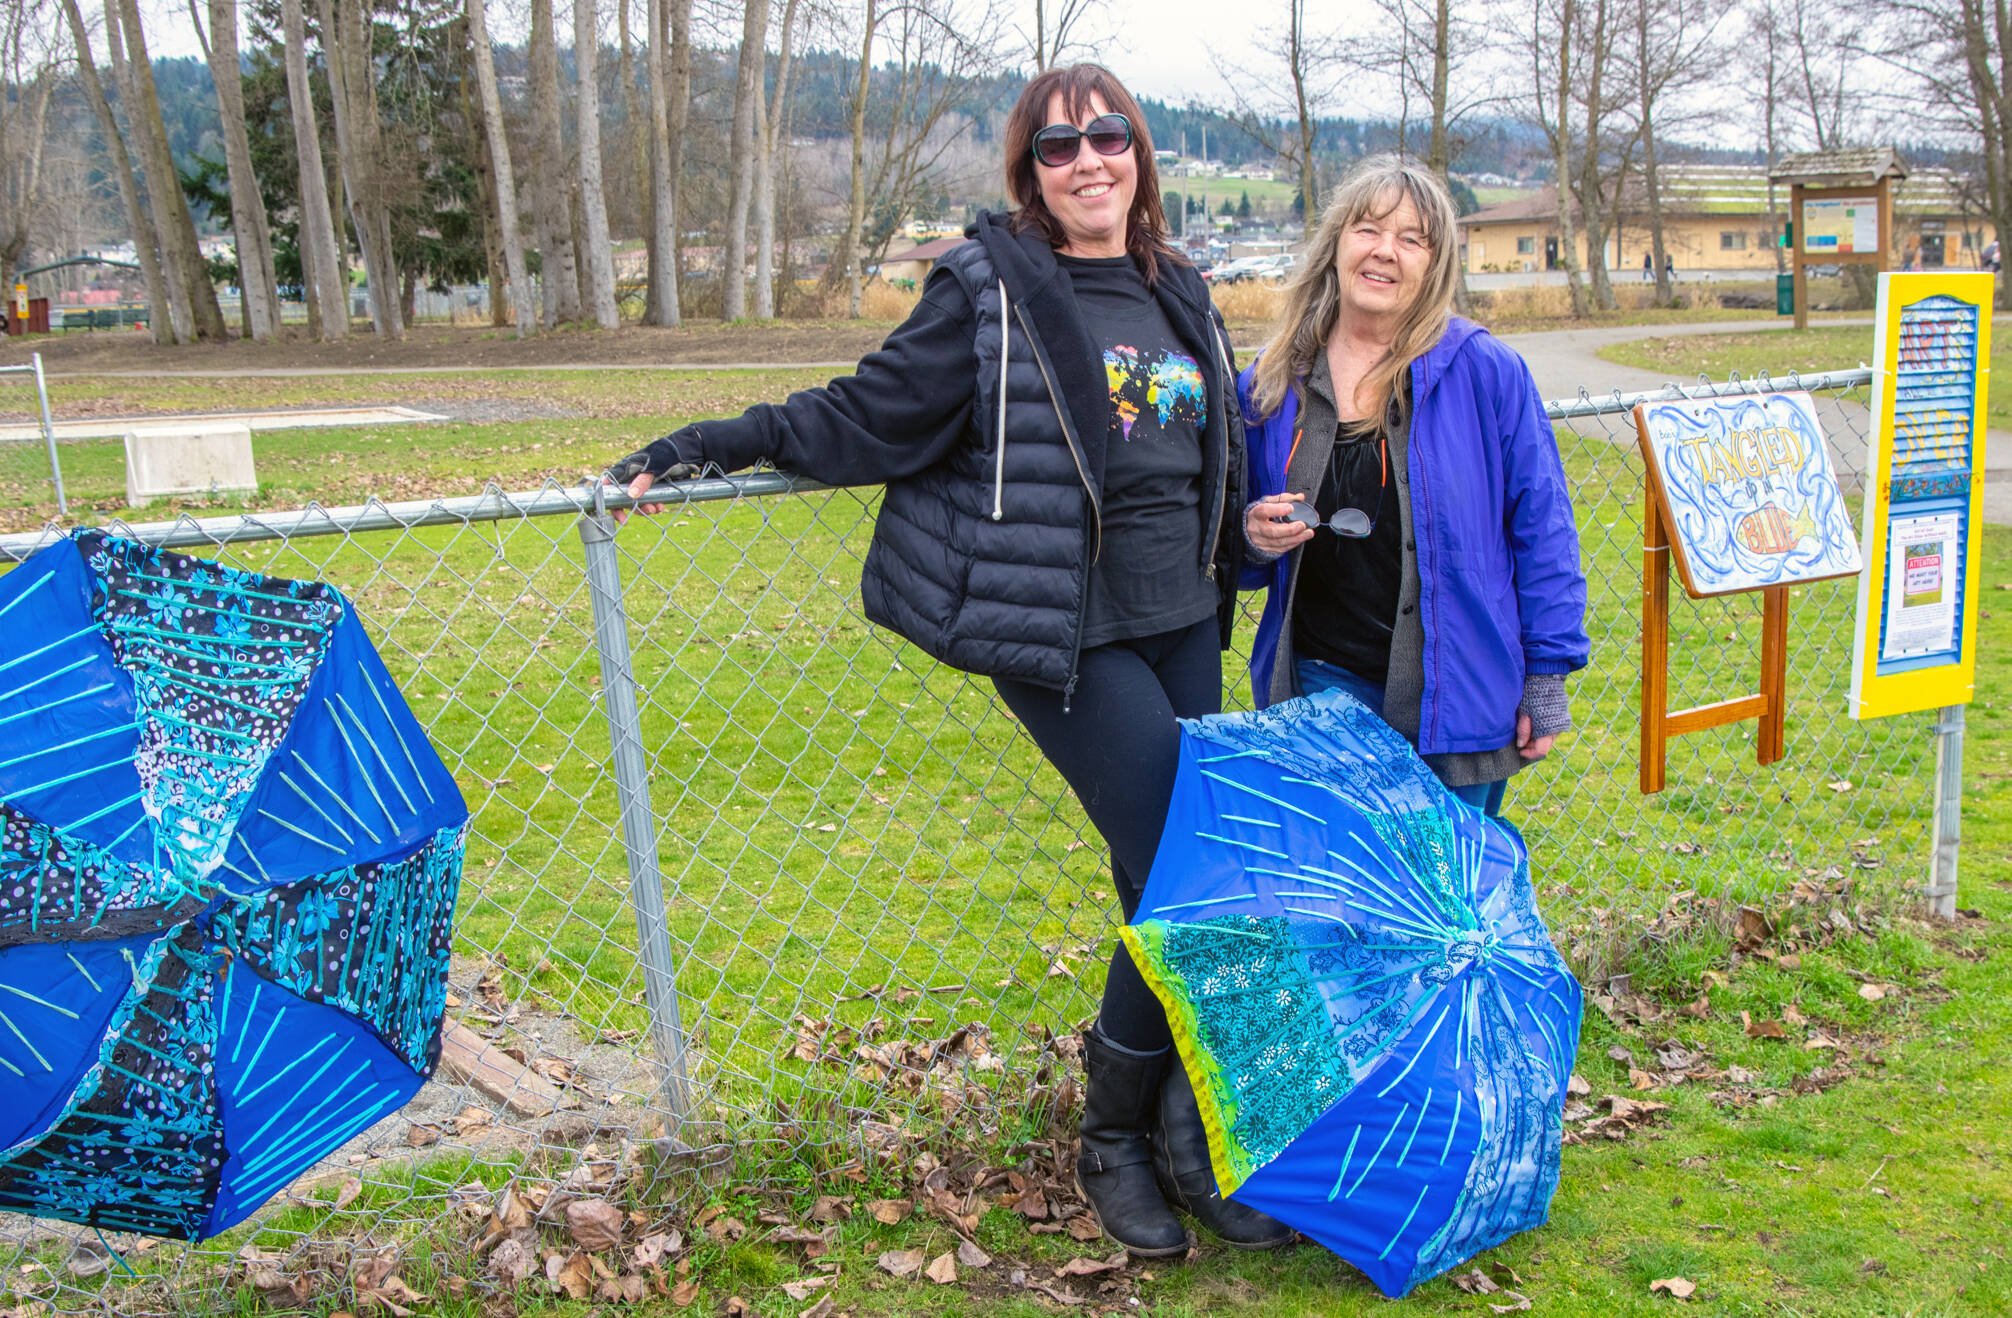 Emily Matthiessen / Olympic Peninsula News Group
Brigitte Schlemmer and Suzanne Horne hang the first pieces for “Art All Over — The Art Show Without Walls,” this past weekend at Carrie Blake City Park.